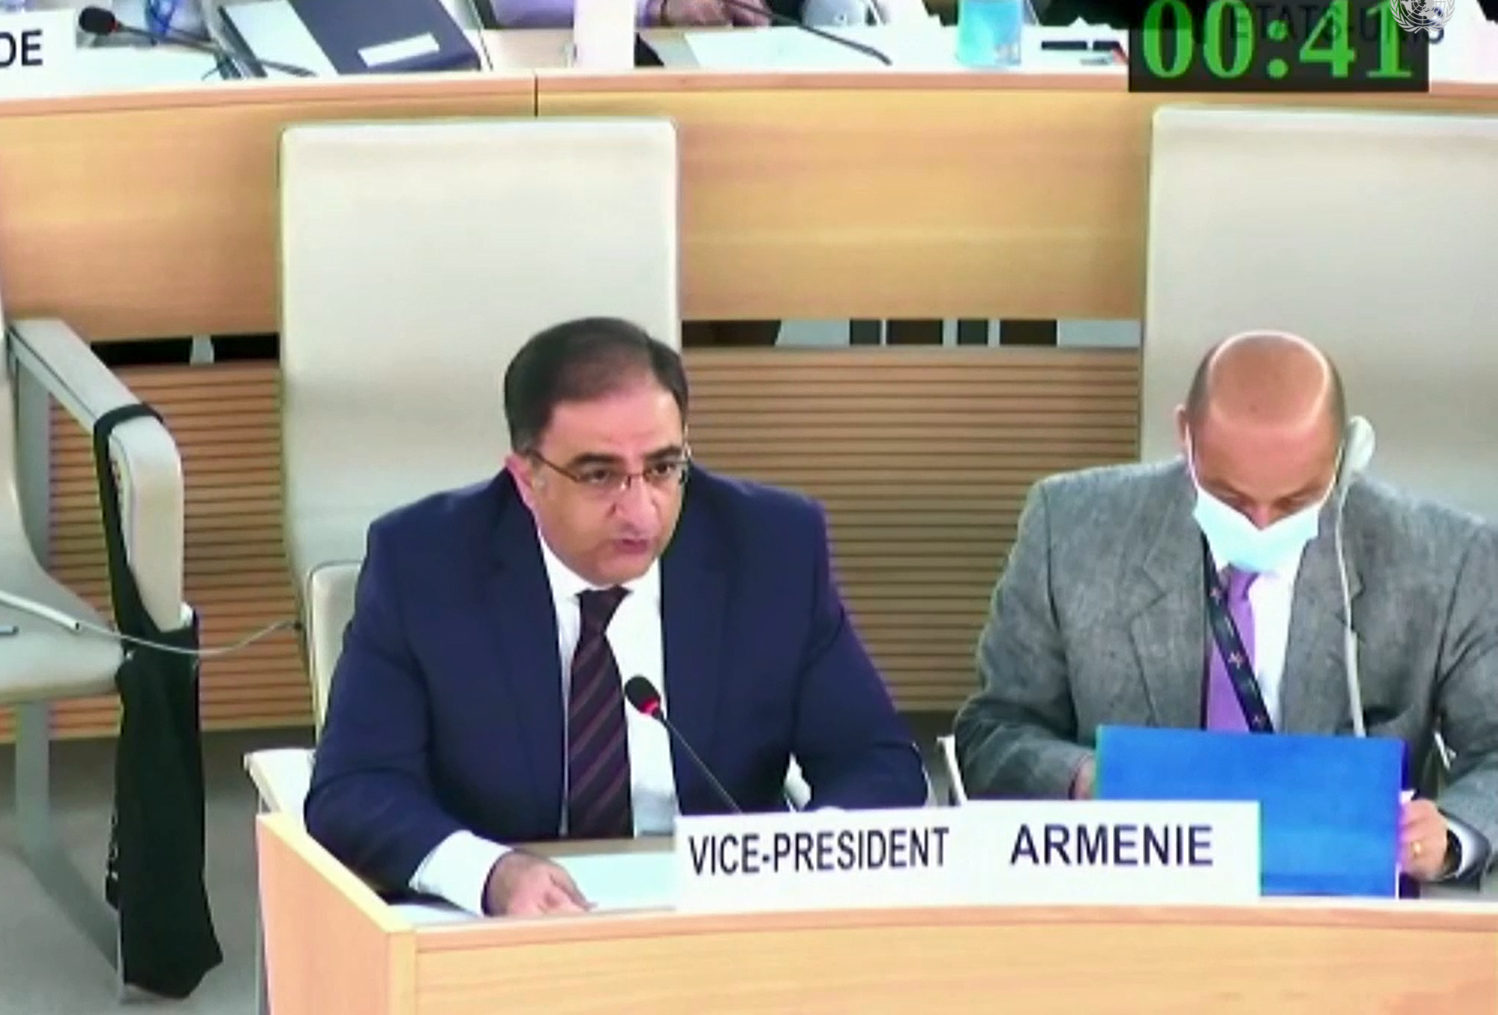 HRC 50th Session: Decisions and conclusions General Comment on the draft resolution Mandate of the Special Rapporteur on the human rights of internally displaced persons: Delivered by H.E. Andranik HOVHANNISYAN, Permanent Representative